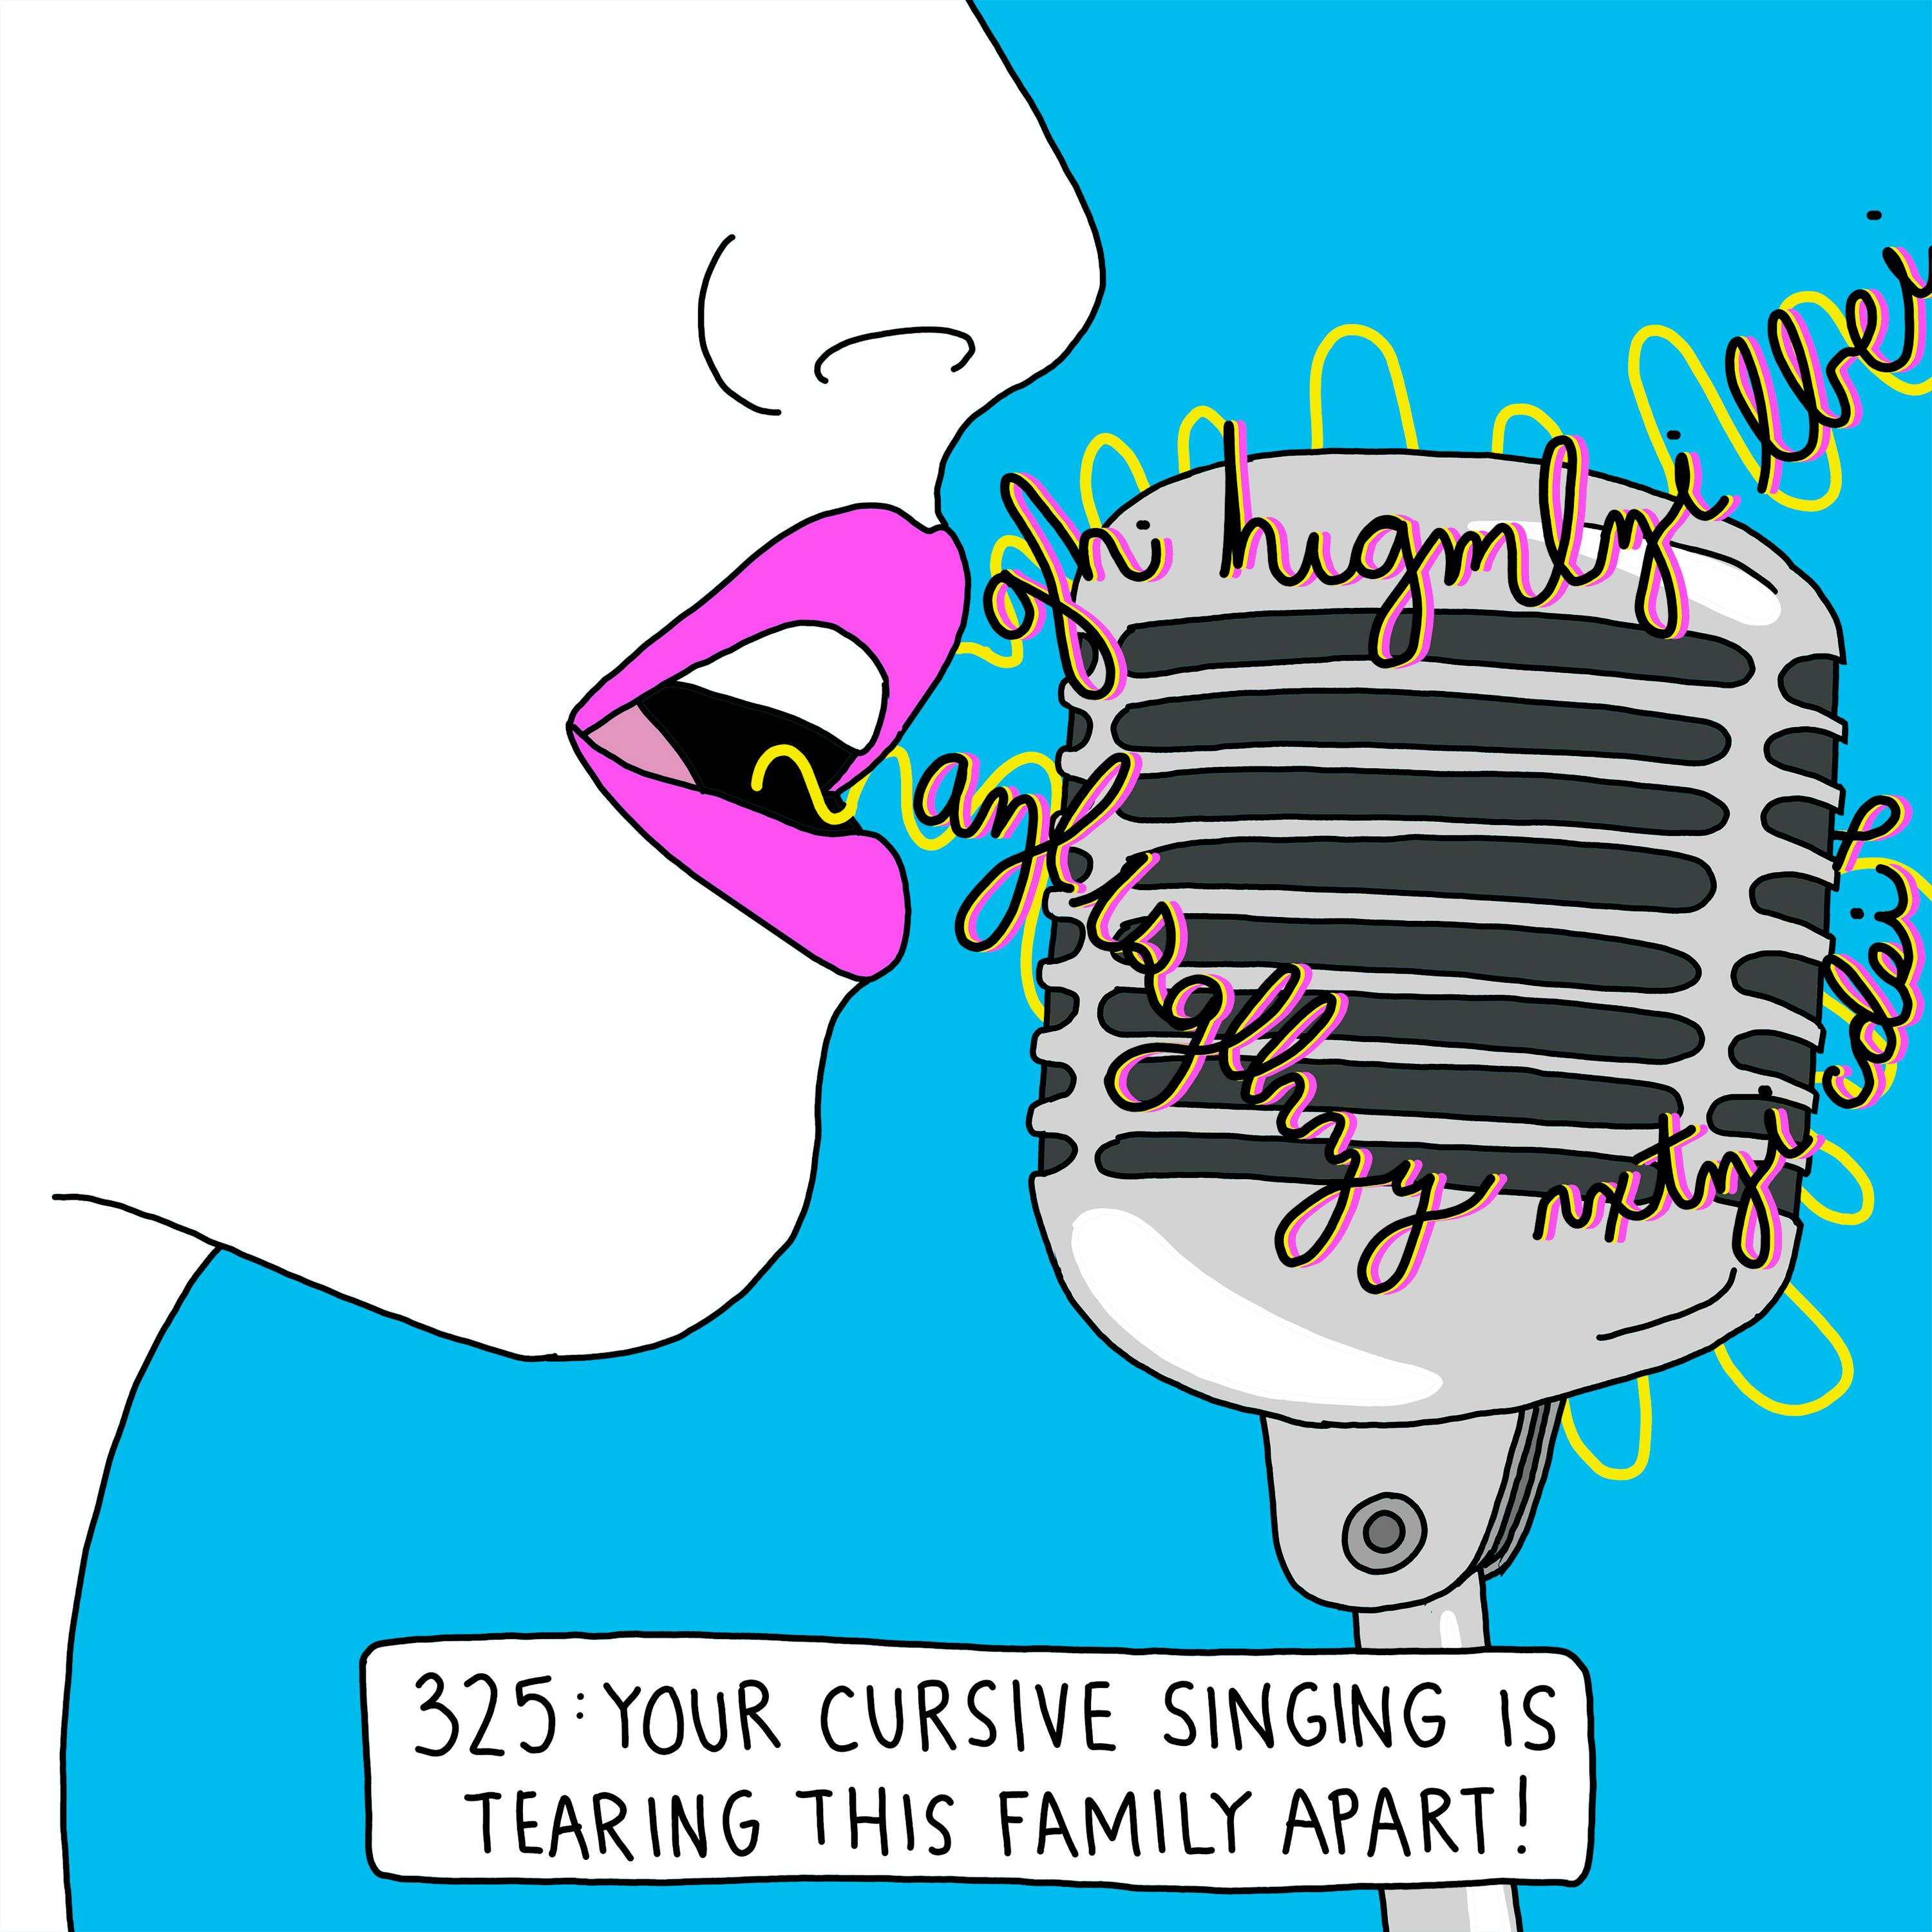 Your cursive singing is tearing this family apart!